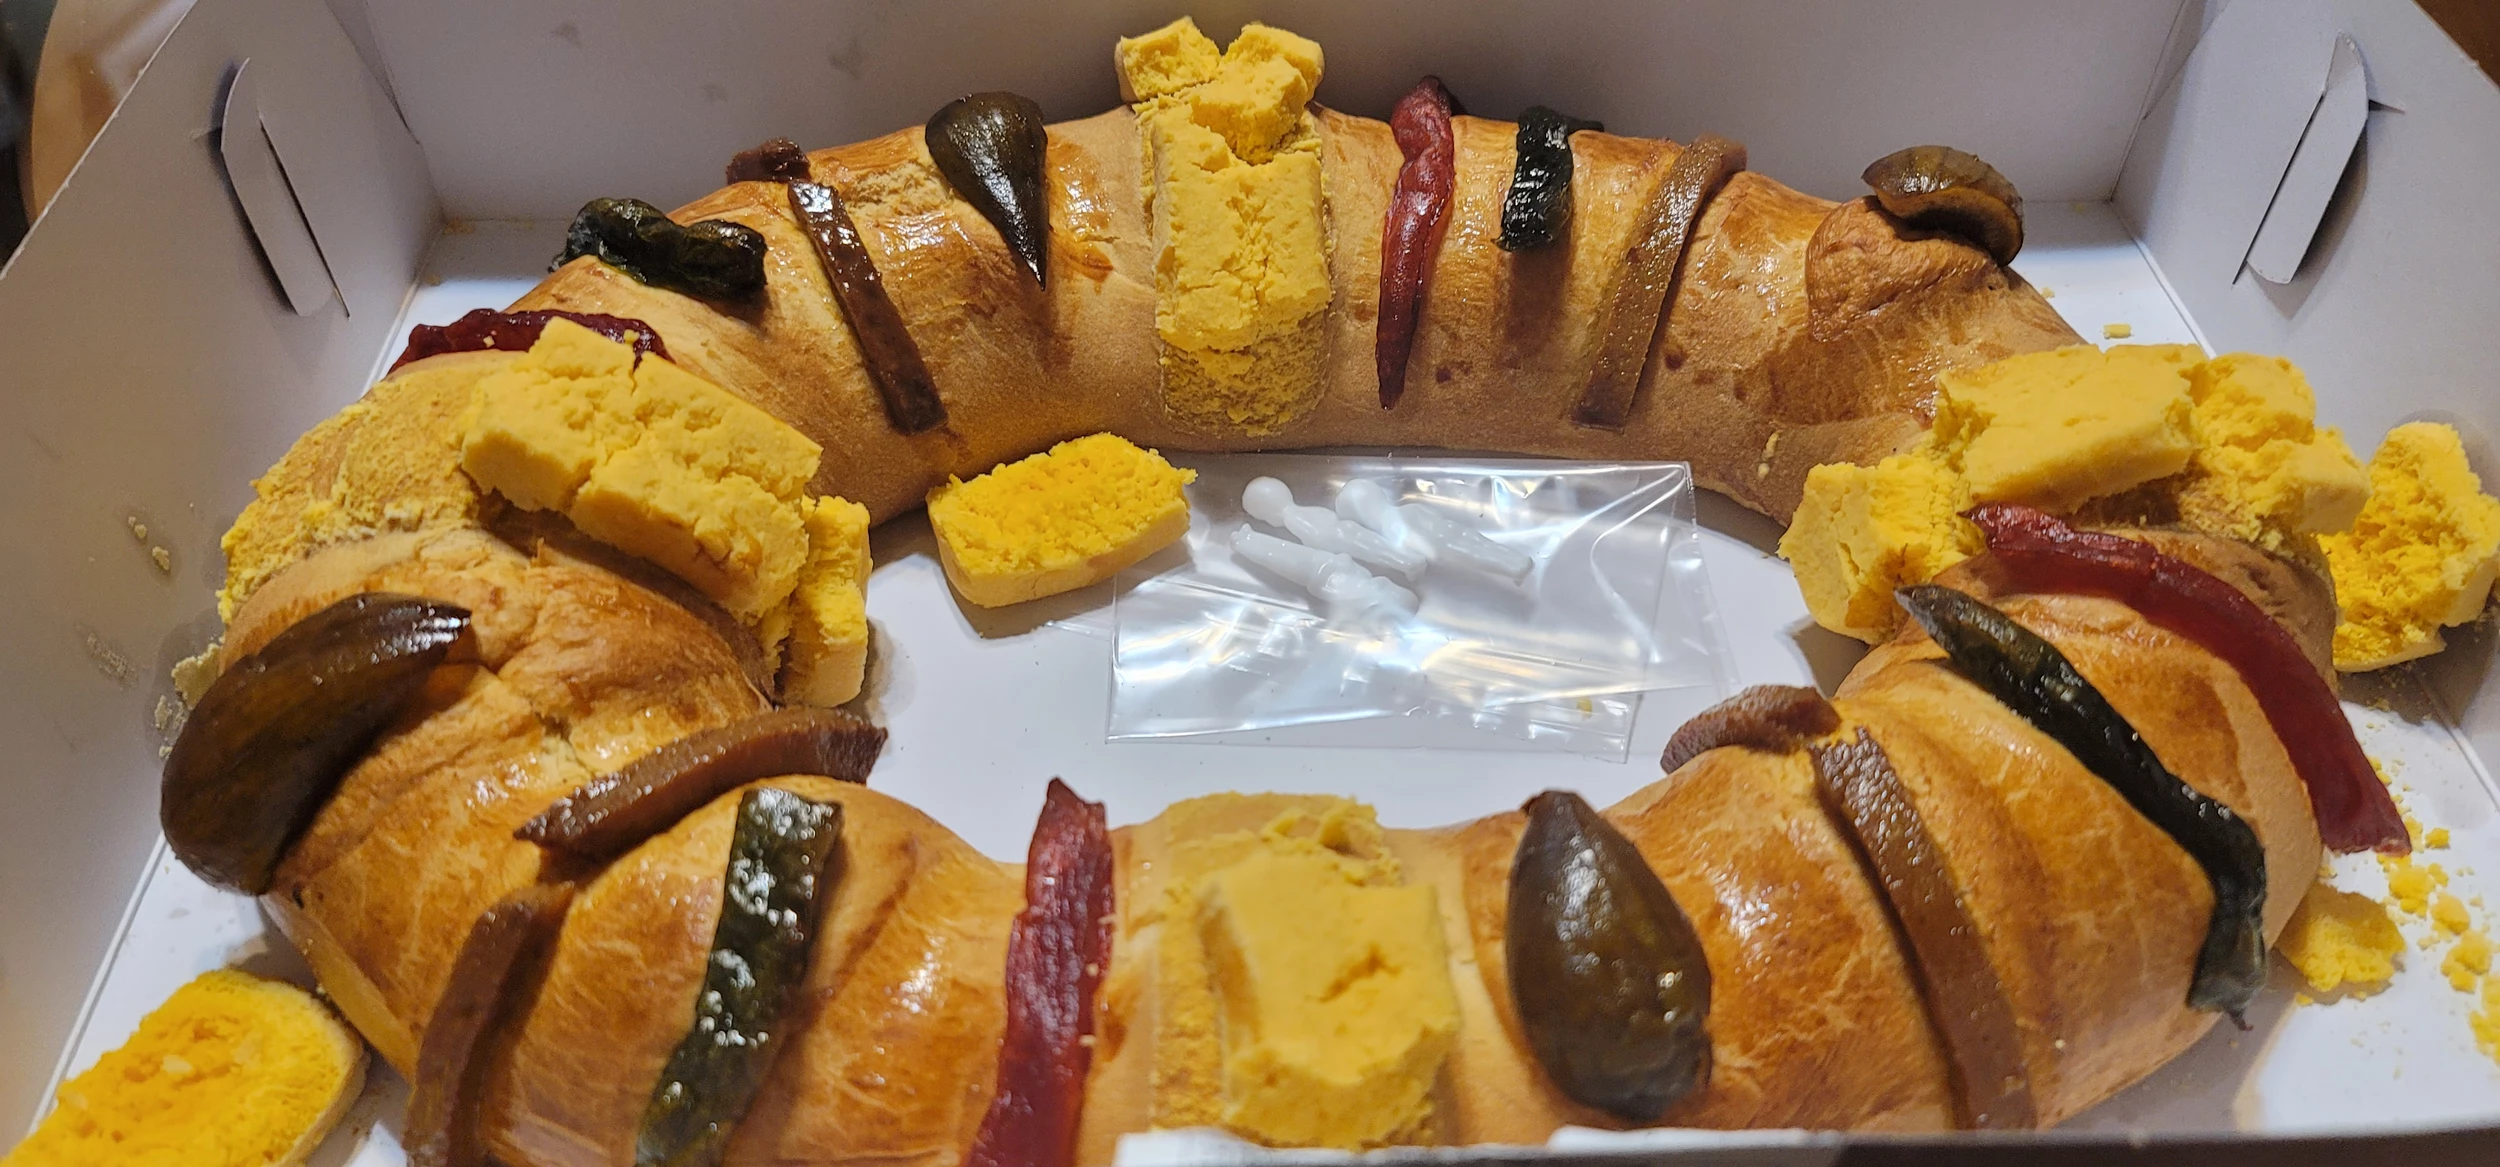 What is a Rosca de Reyes and why Does it Look Like a Giant Donut?